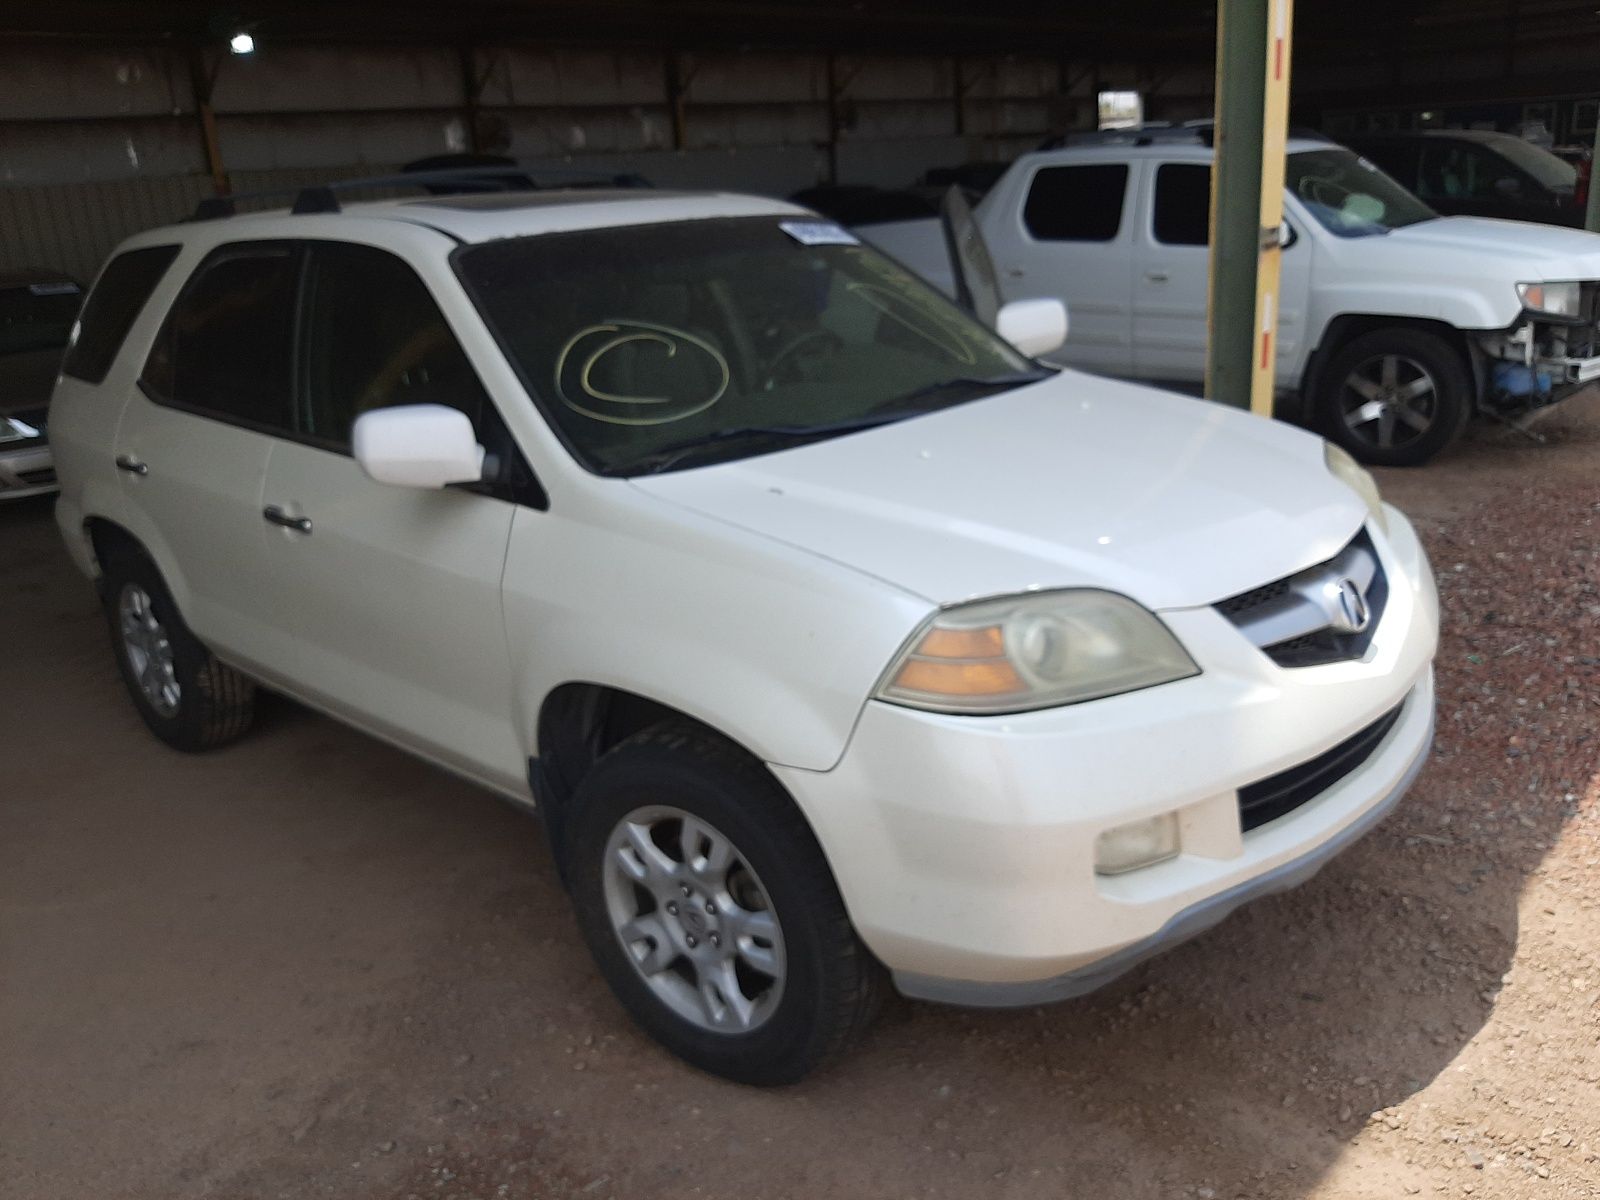 1 of 2HNYD18604H560215 Acura MDX 2004